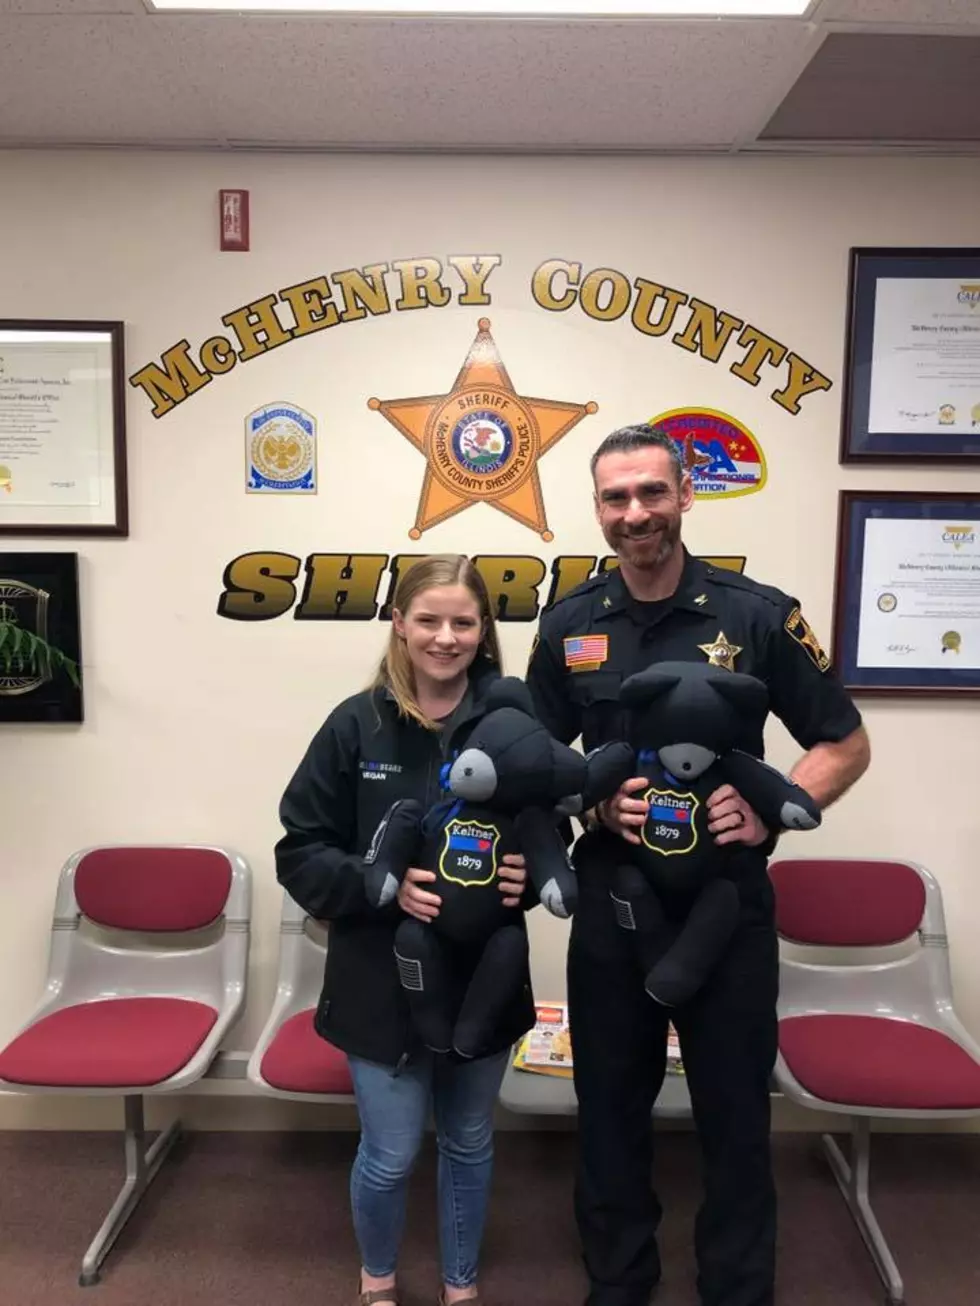 Deputy Keltner&#8217;s Sons Receive Bears Made From Their Dad&#8217;s Uniform